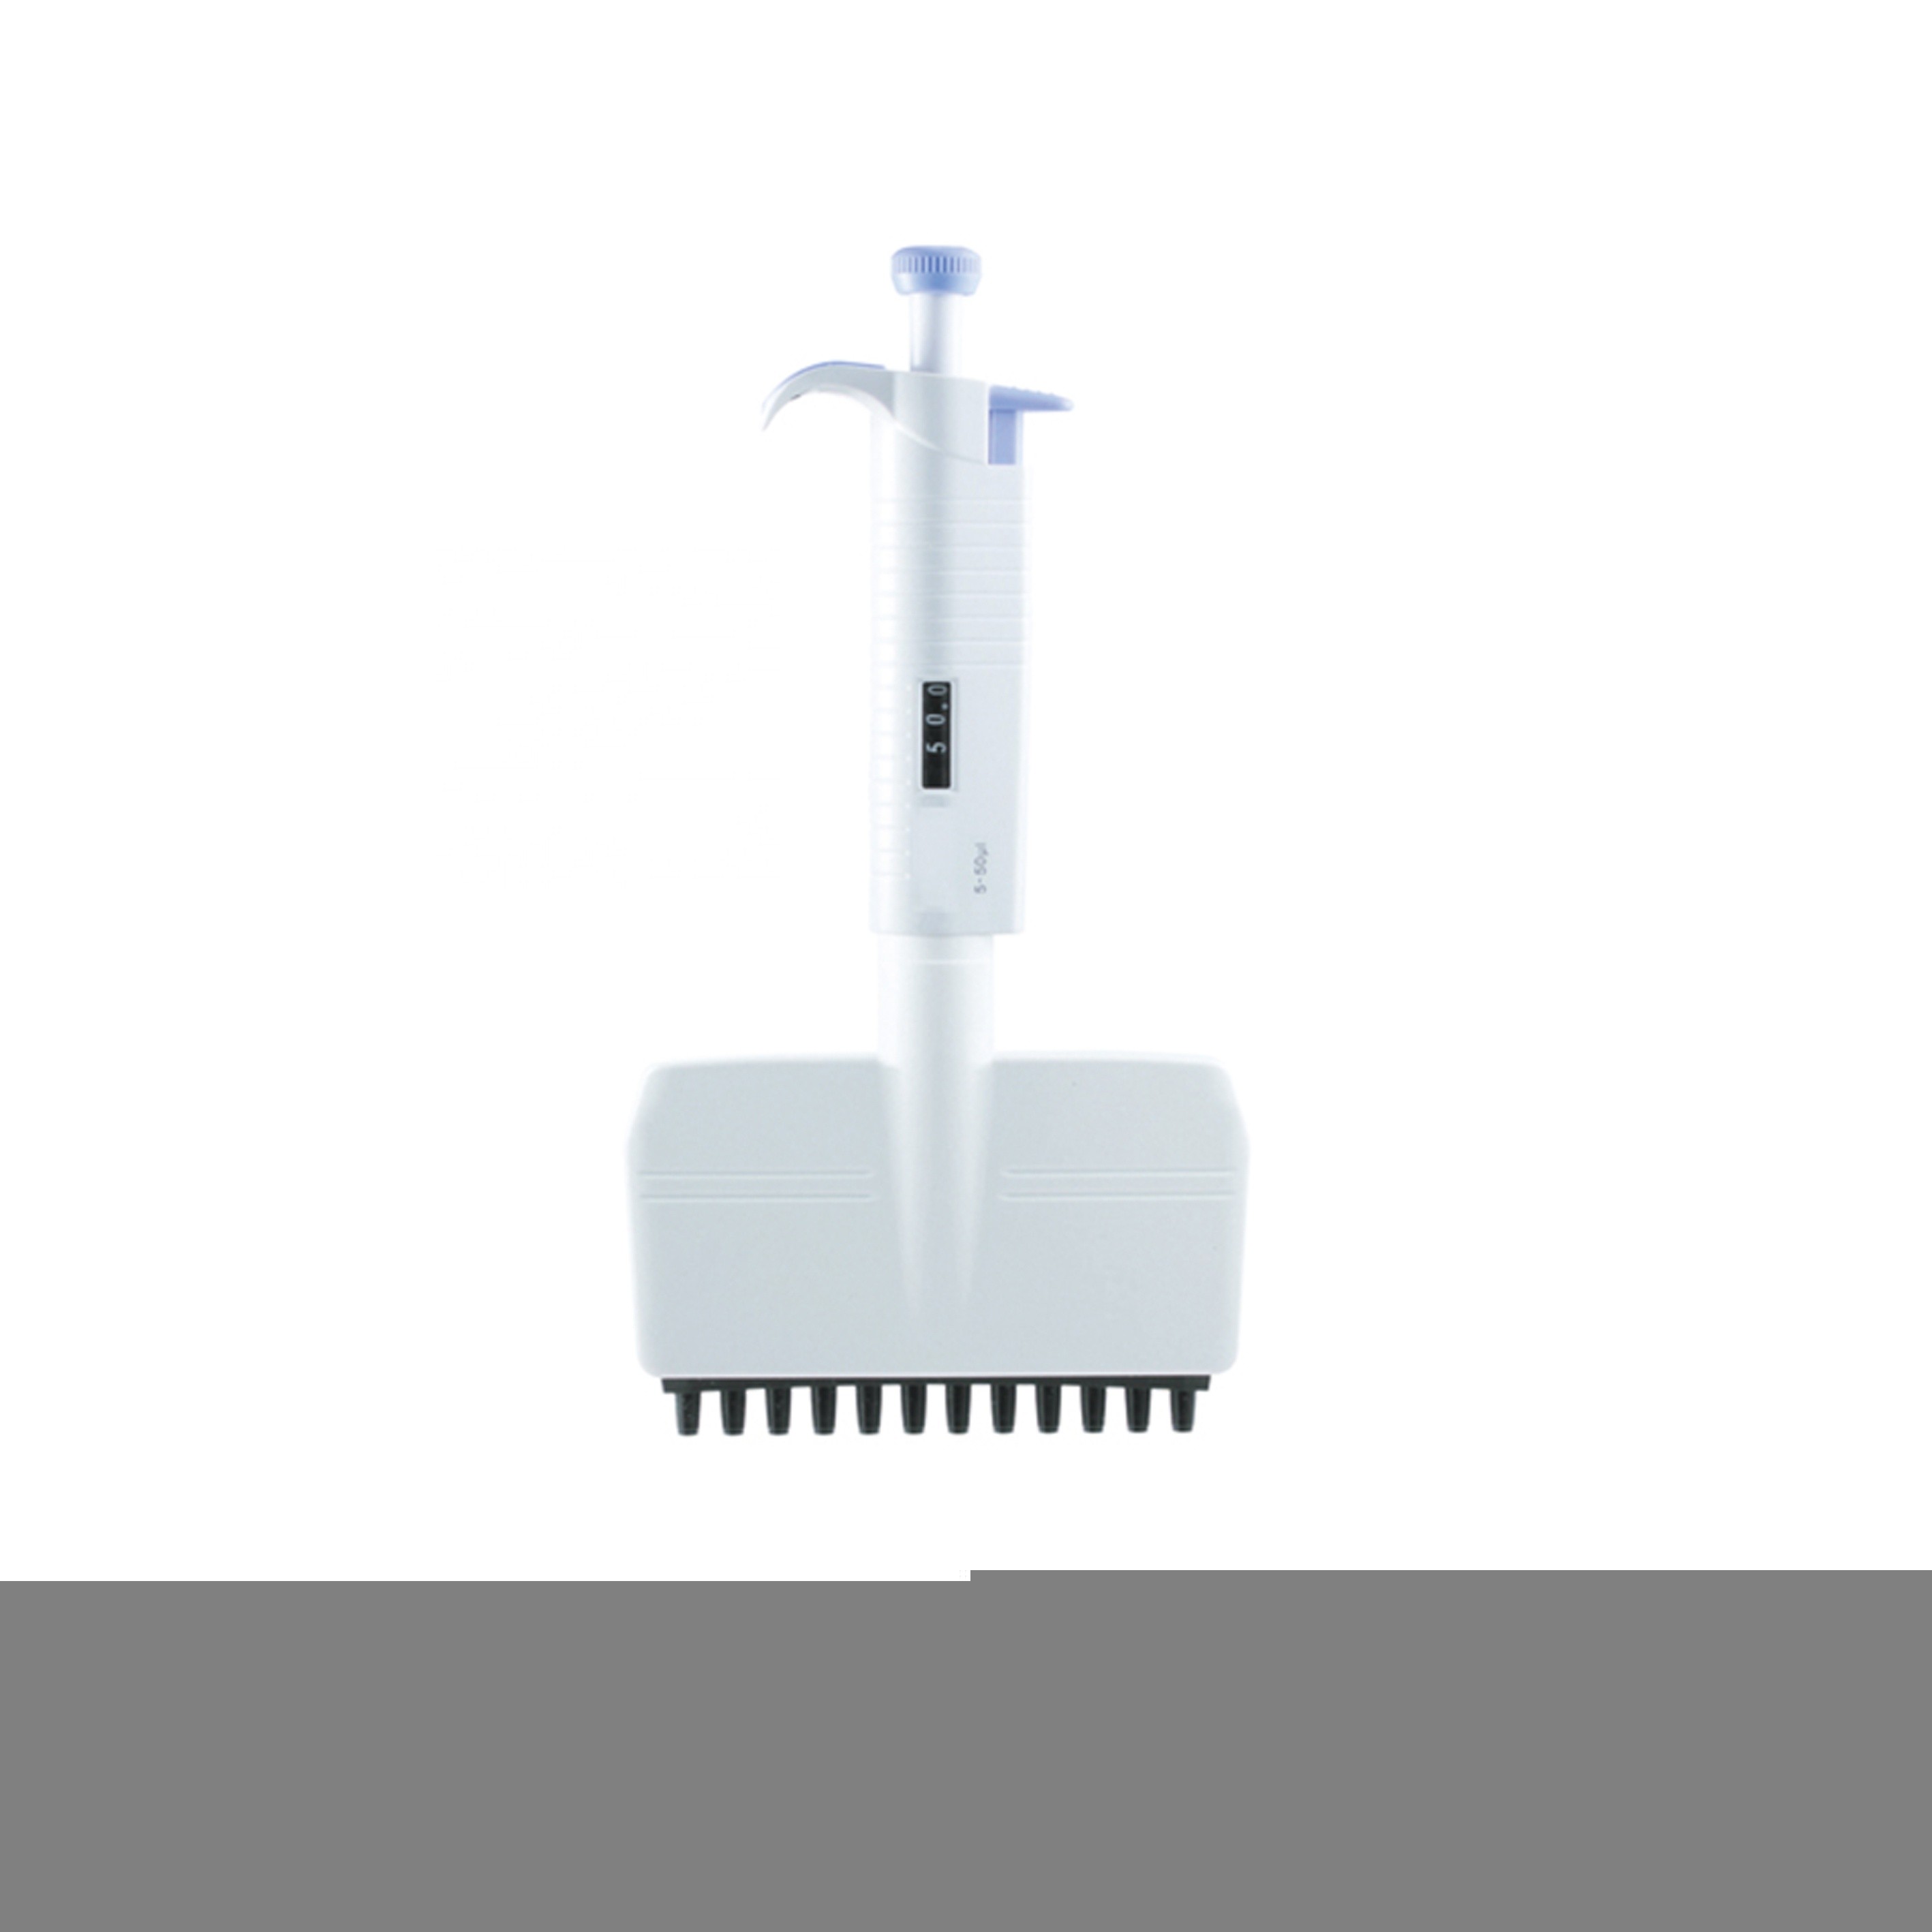 Pipette Filler for sale with high capacity Li-ion battery